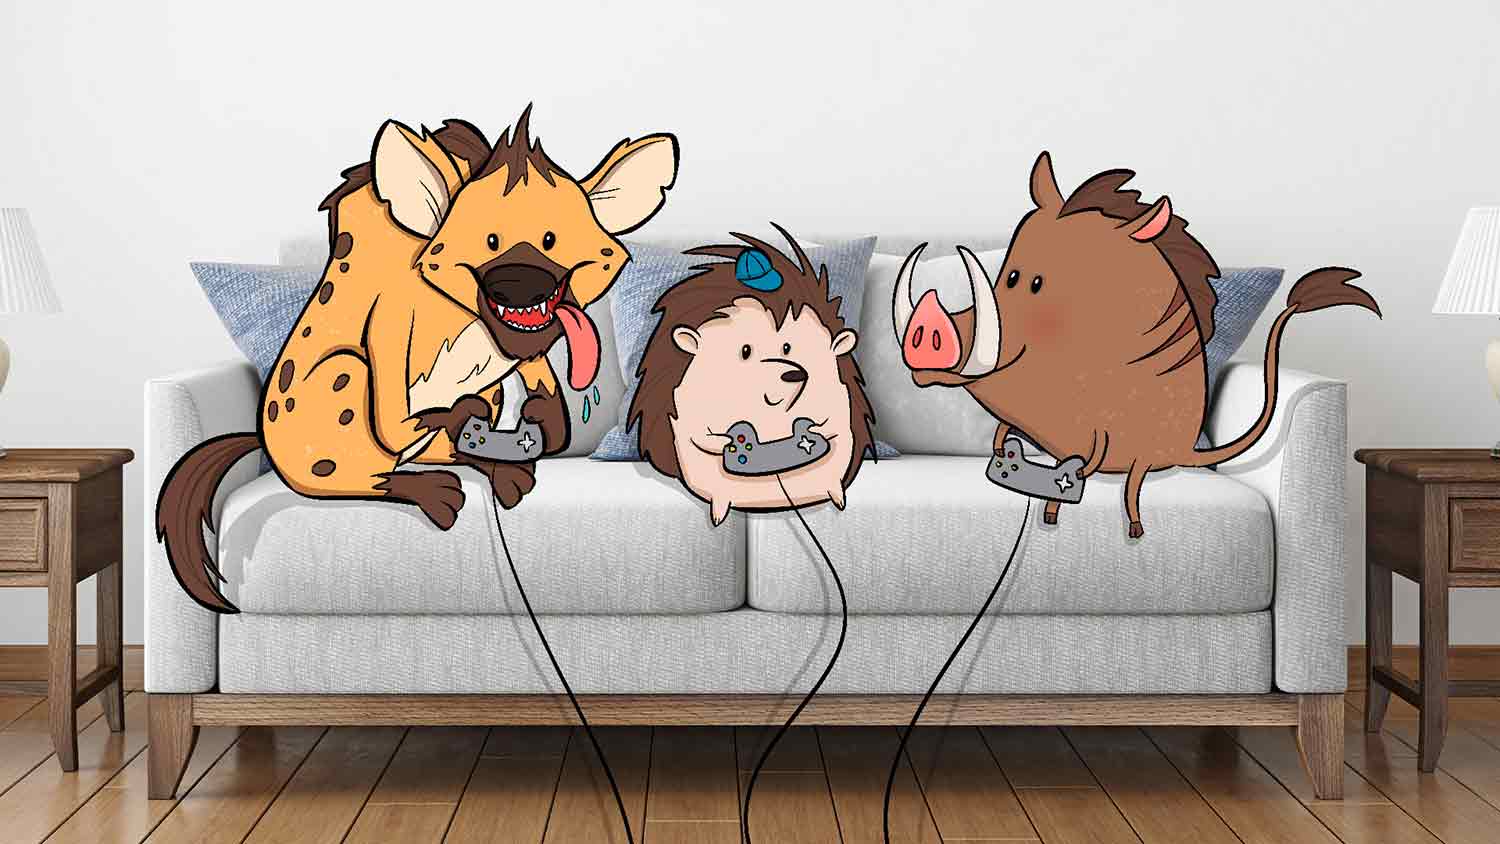 A hyena, a porcupine, and a warthog sit on a couch playing video games.